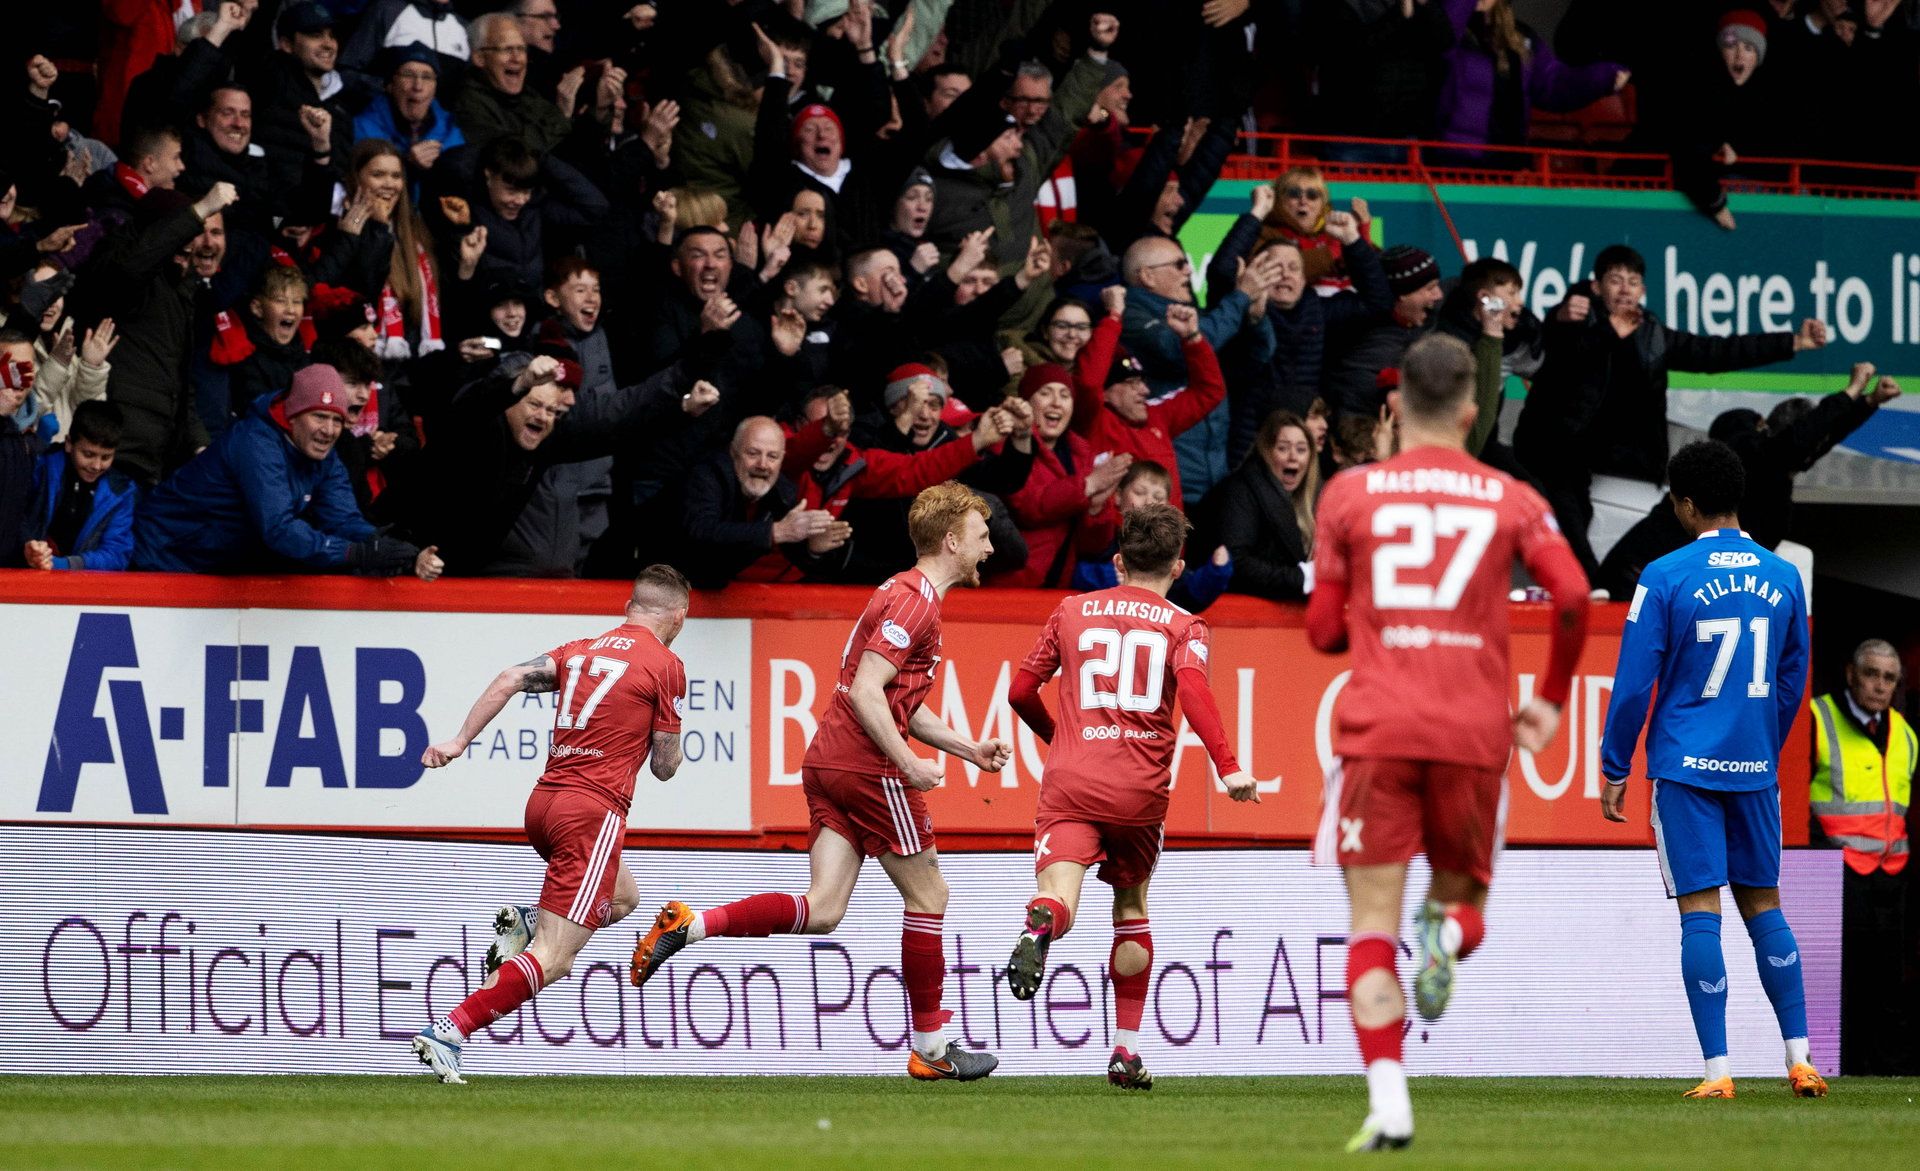 Aberdeen defeated Rangers 2-0 at Pittodrie in their final pre-split match.. (Photo by Alan Harvey / SNS Group)